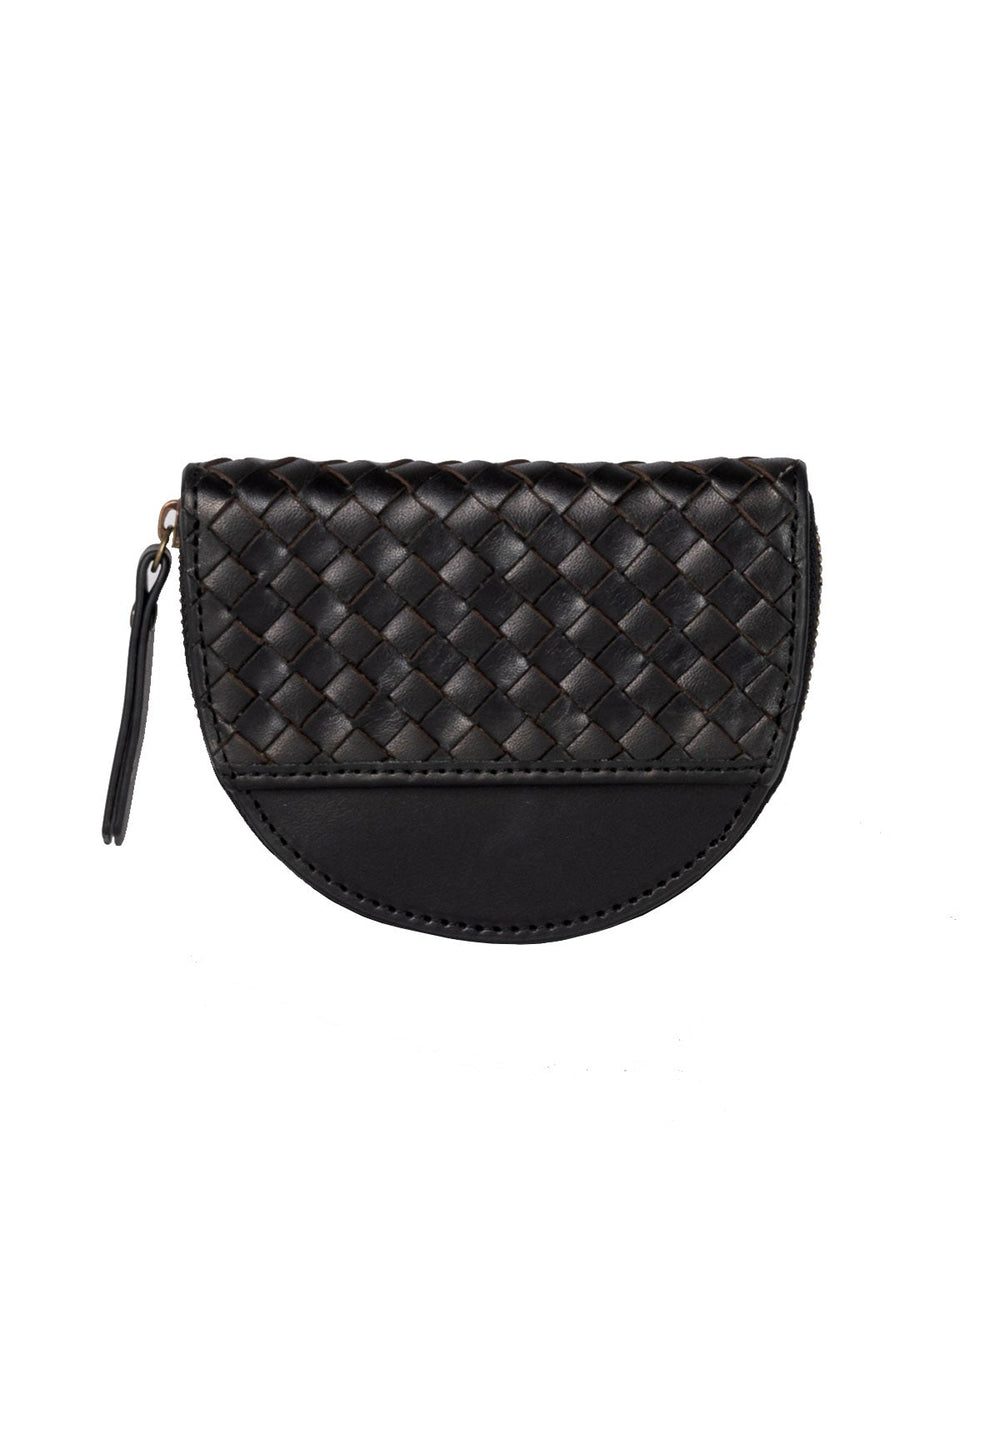 LAURA'S COIN PURSE BLACK WOVEN LEATHER - Moeon